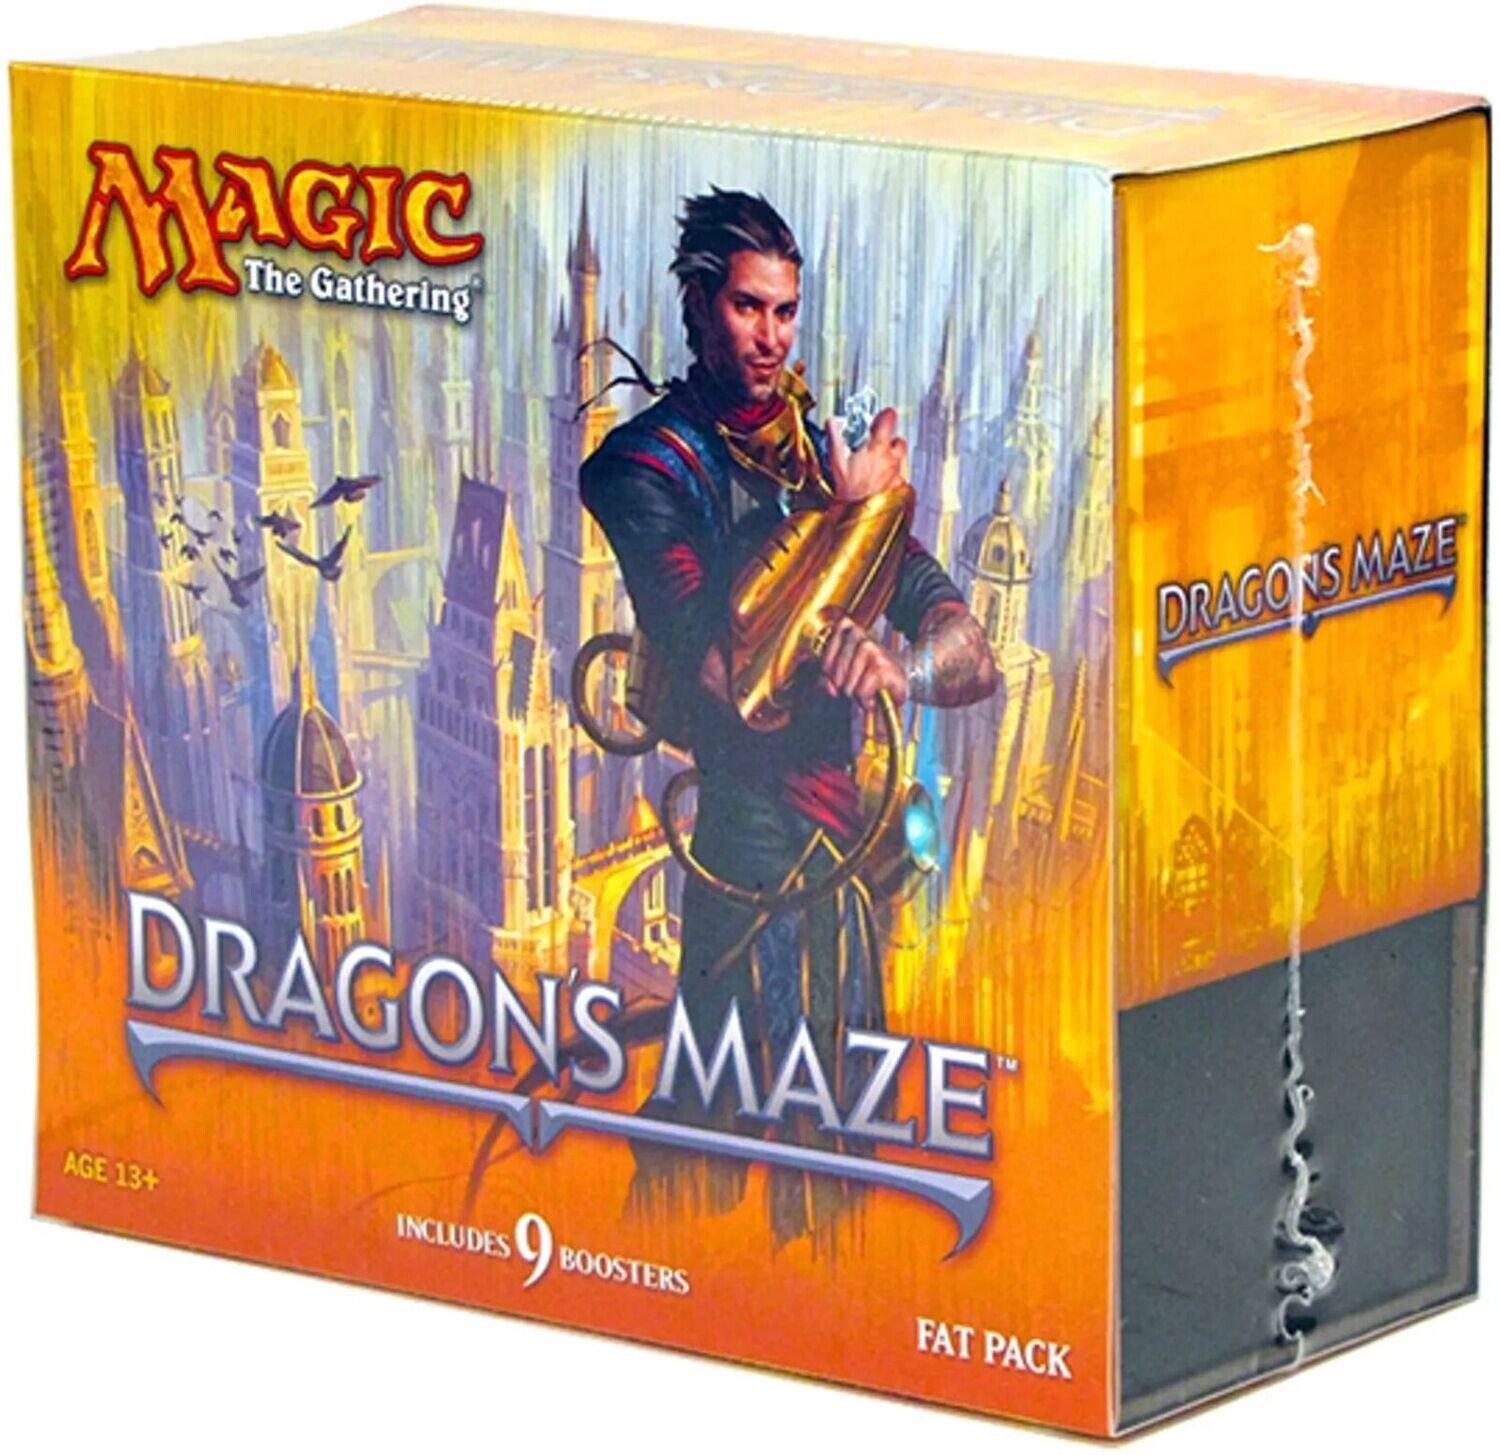 Dragons Maze Fat Pack